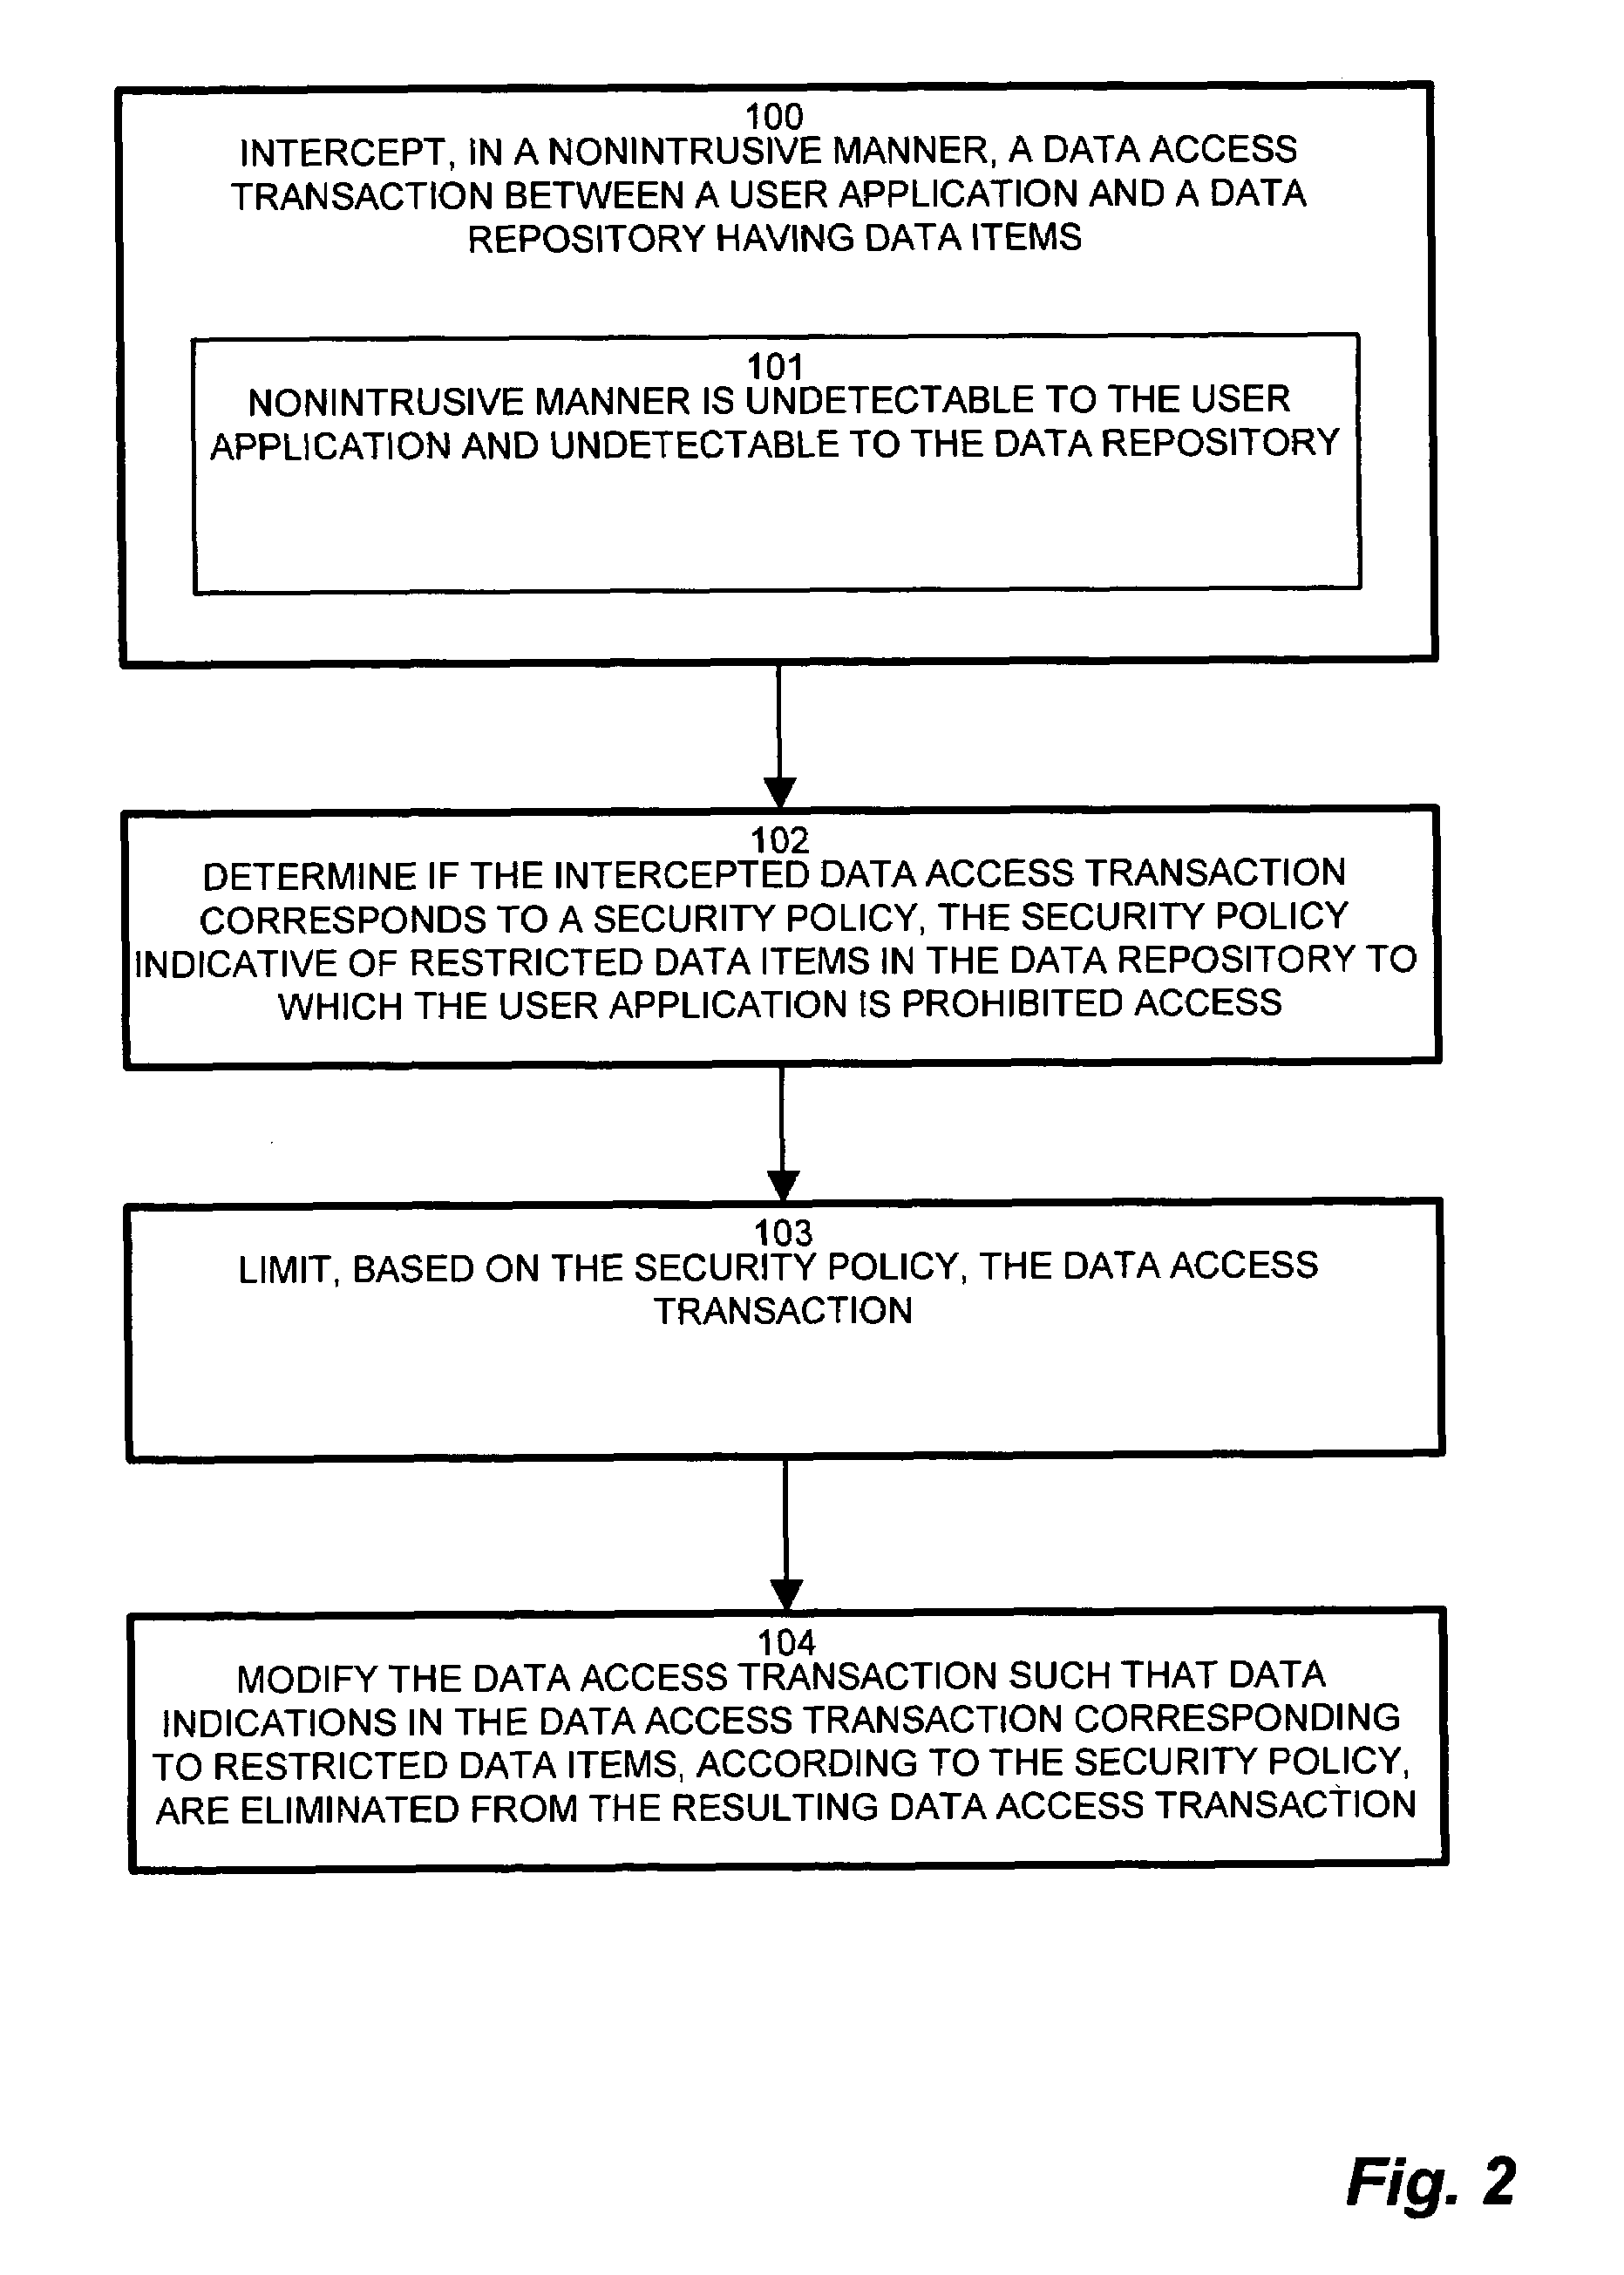 System and methods for nonintrusive database security